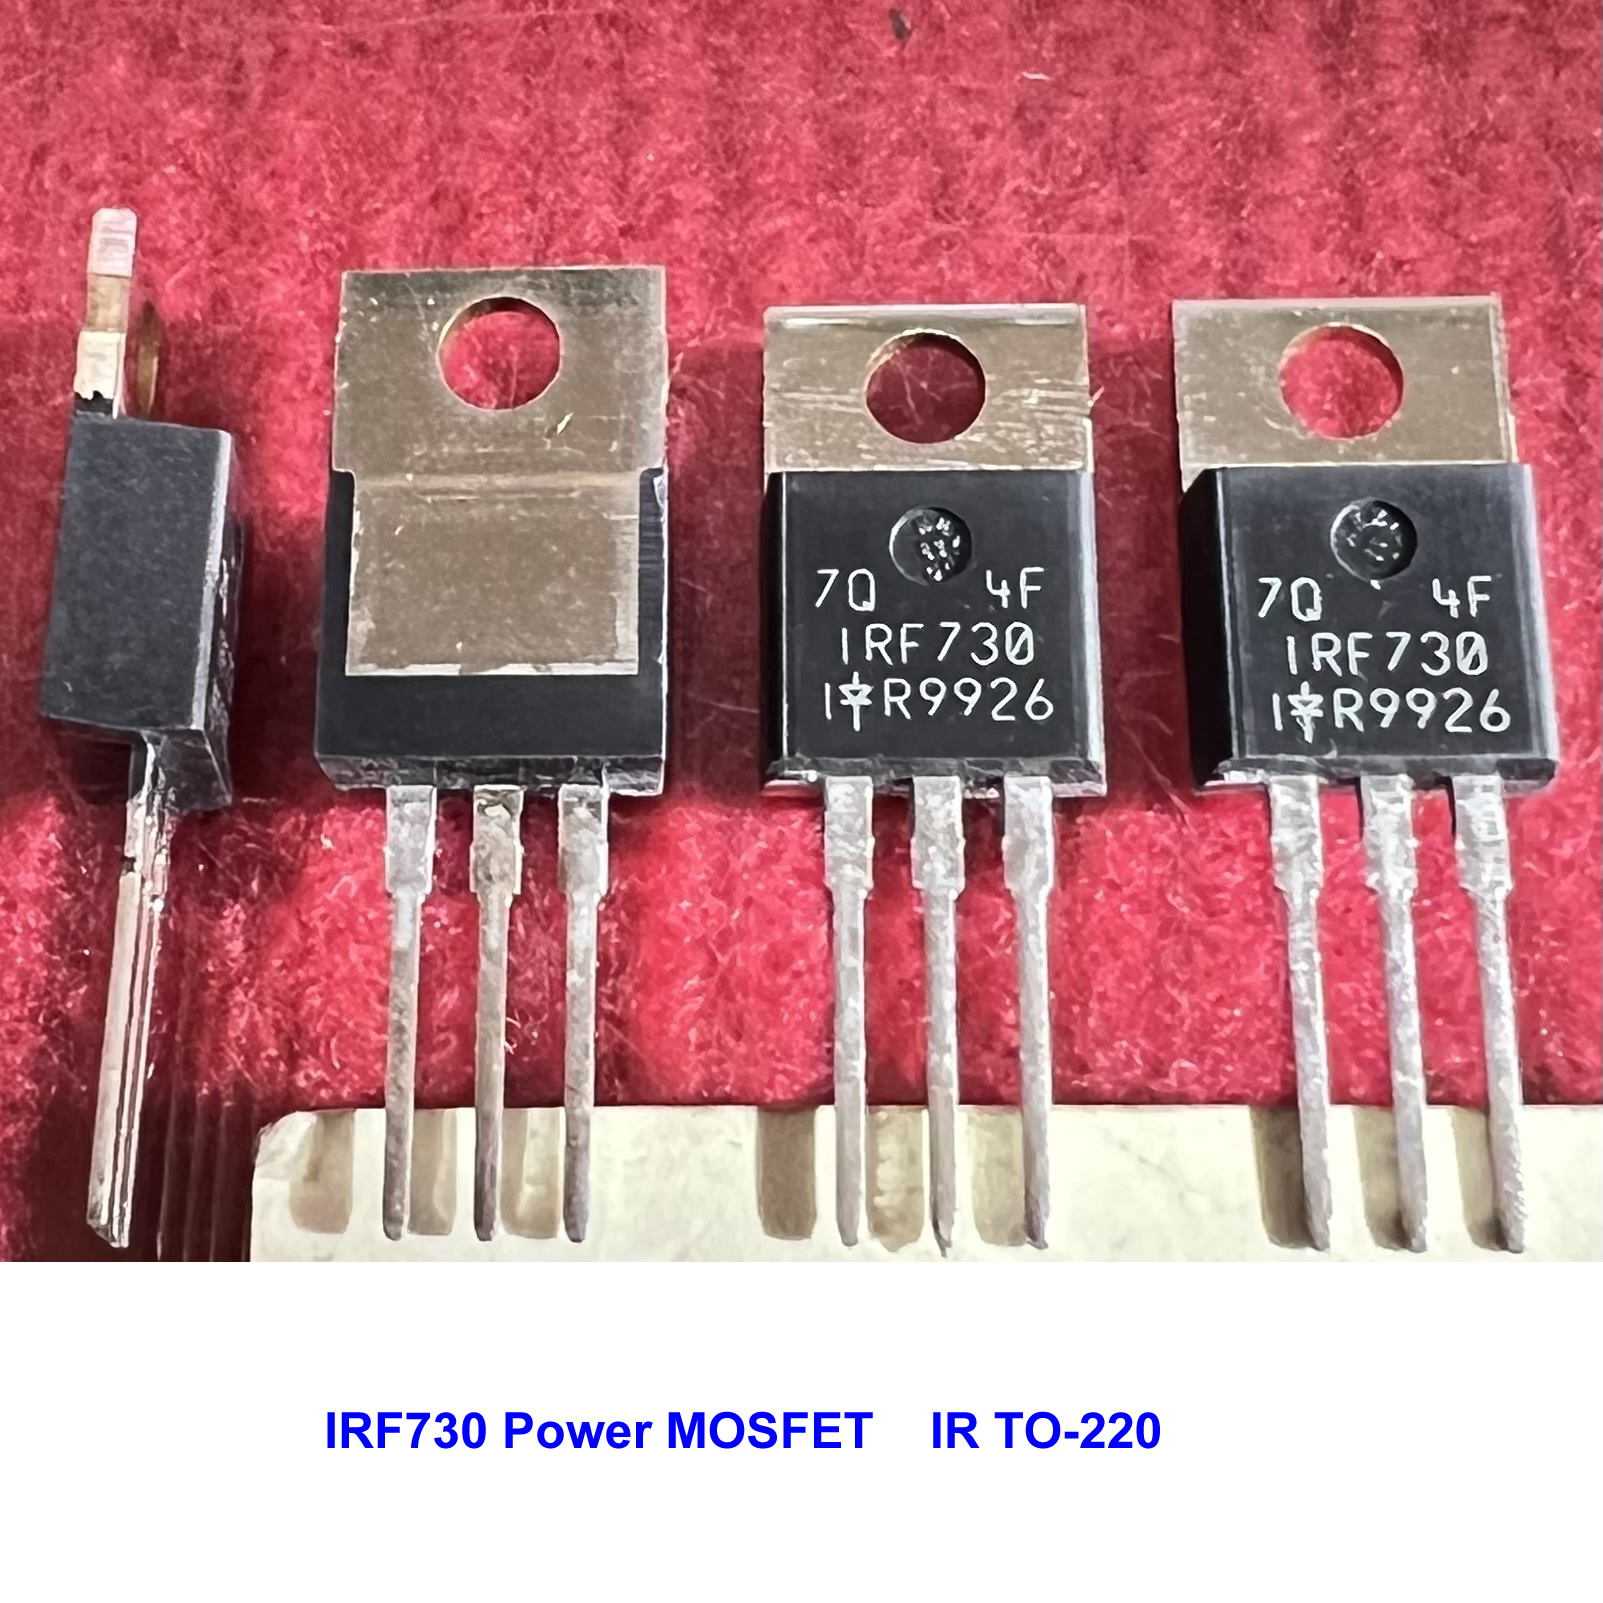 IRF730 6.0A 400V N CHANNEL POWER MOSFE Power MOSFET IR TO-220